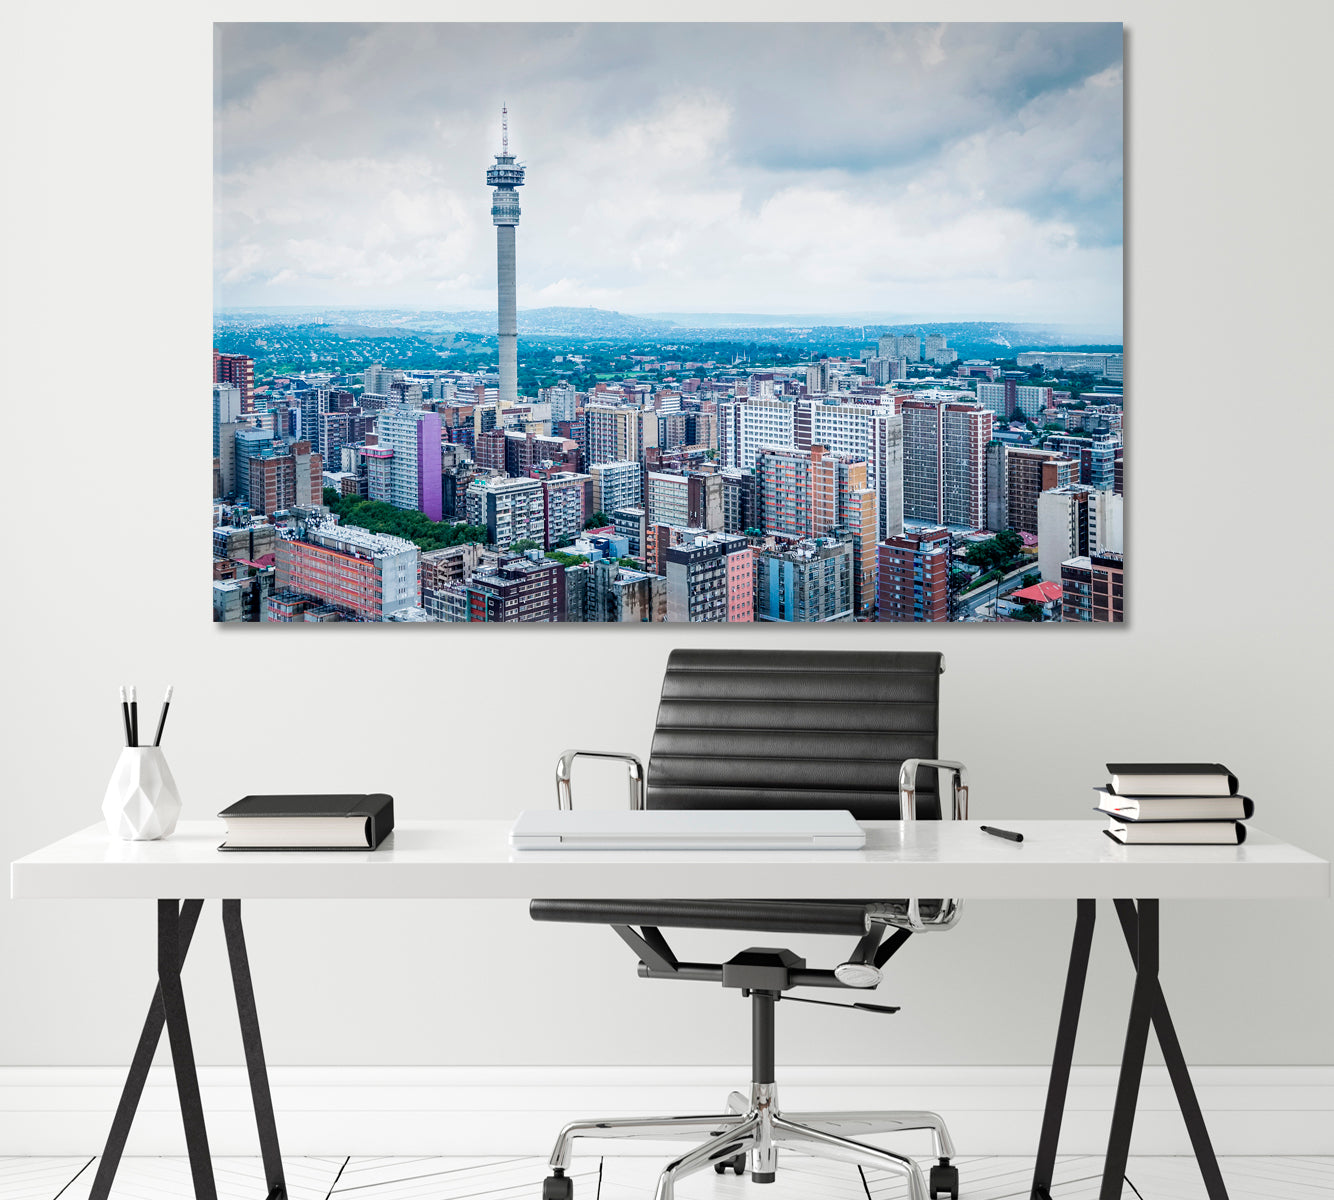 Johannesburg South Africa Canvas Print ArtLexy 1 Panel 24"x16" inches 